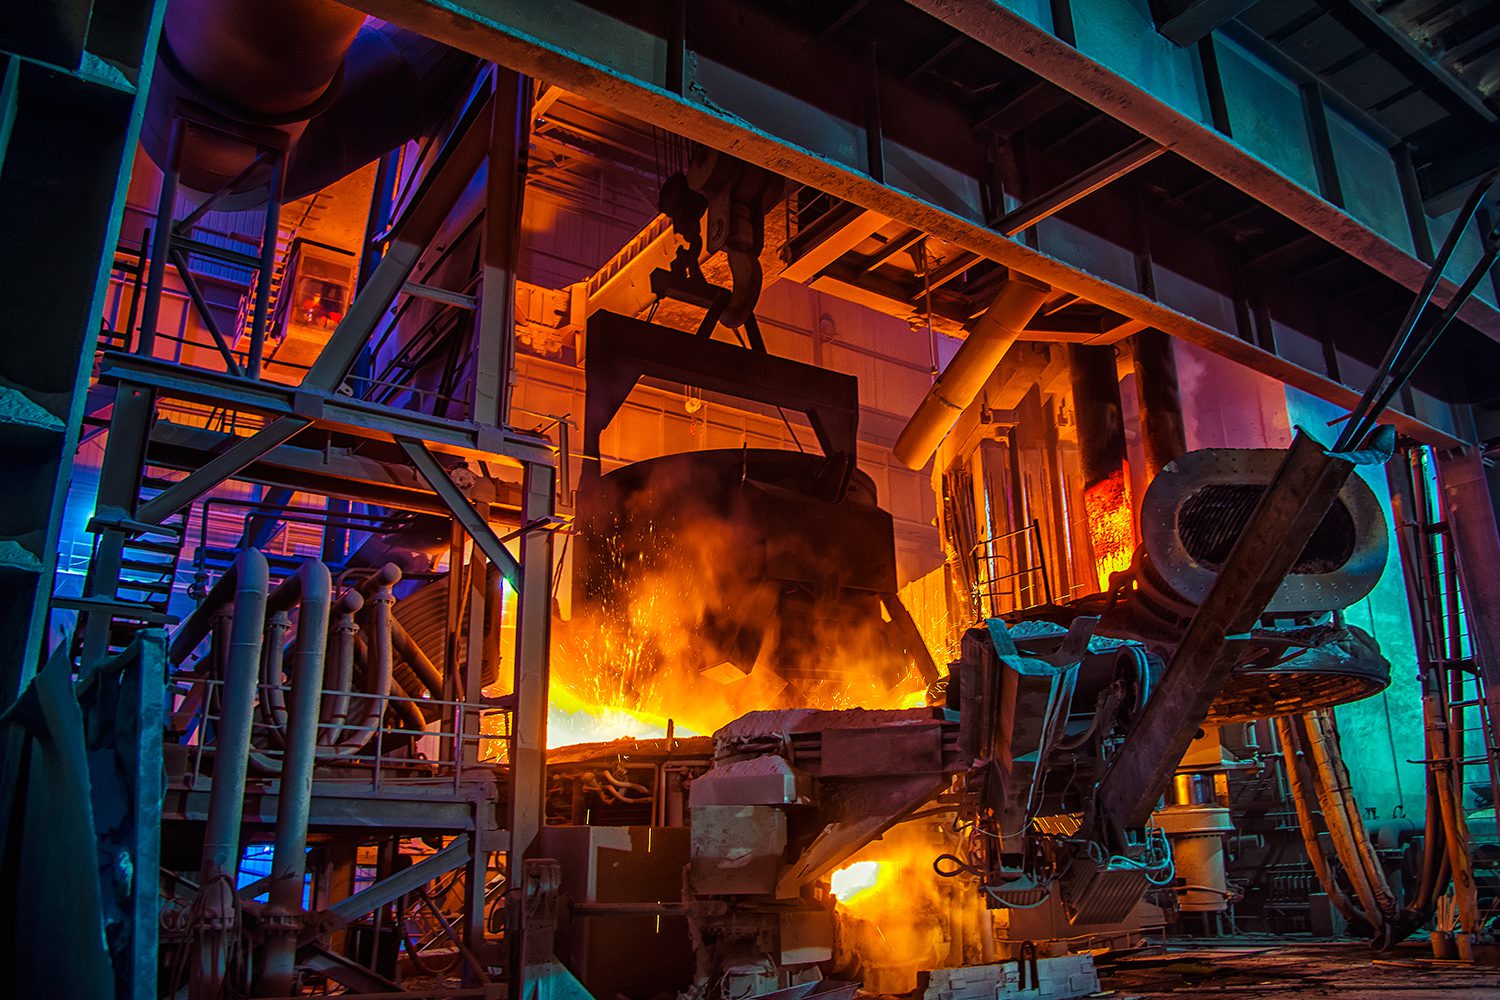 Russian steel and iron are sanctioned, even if its being processed in a third country.